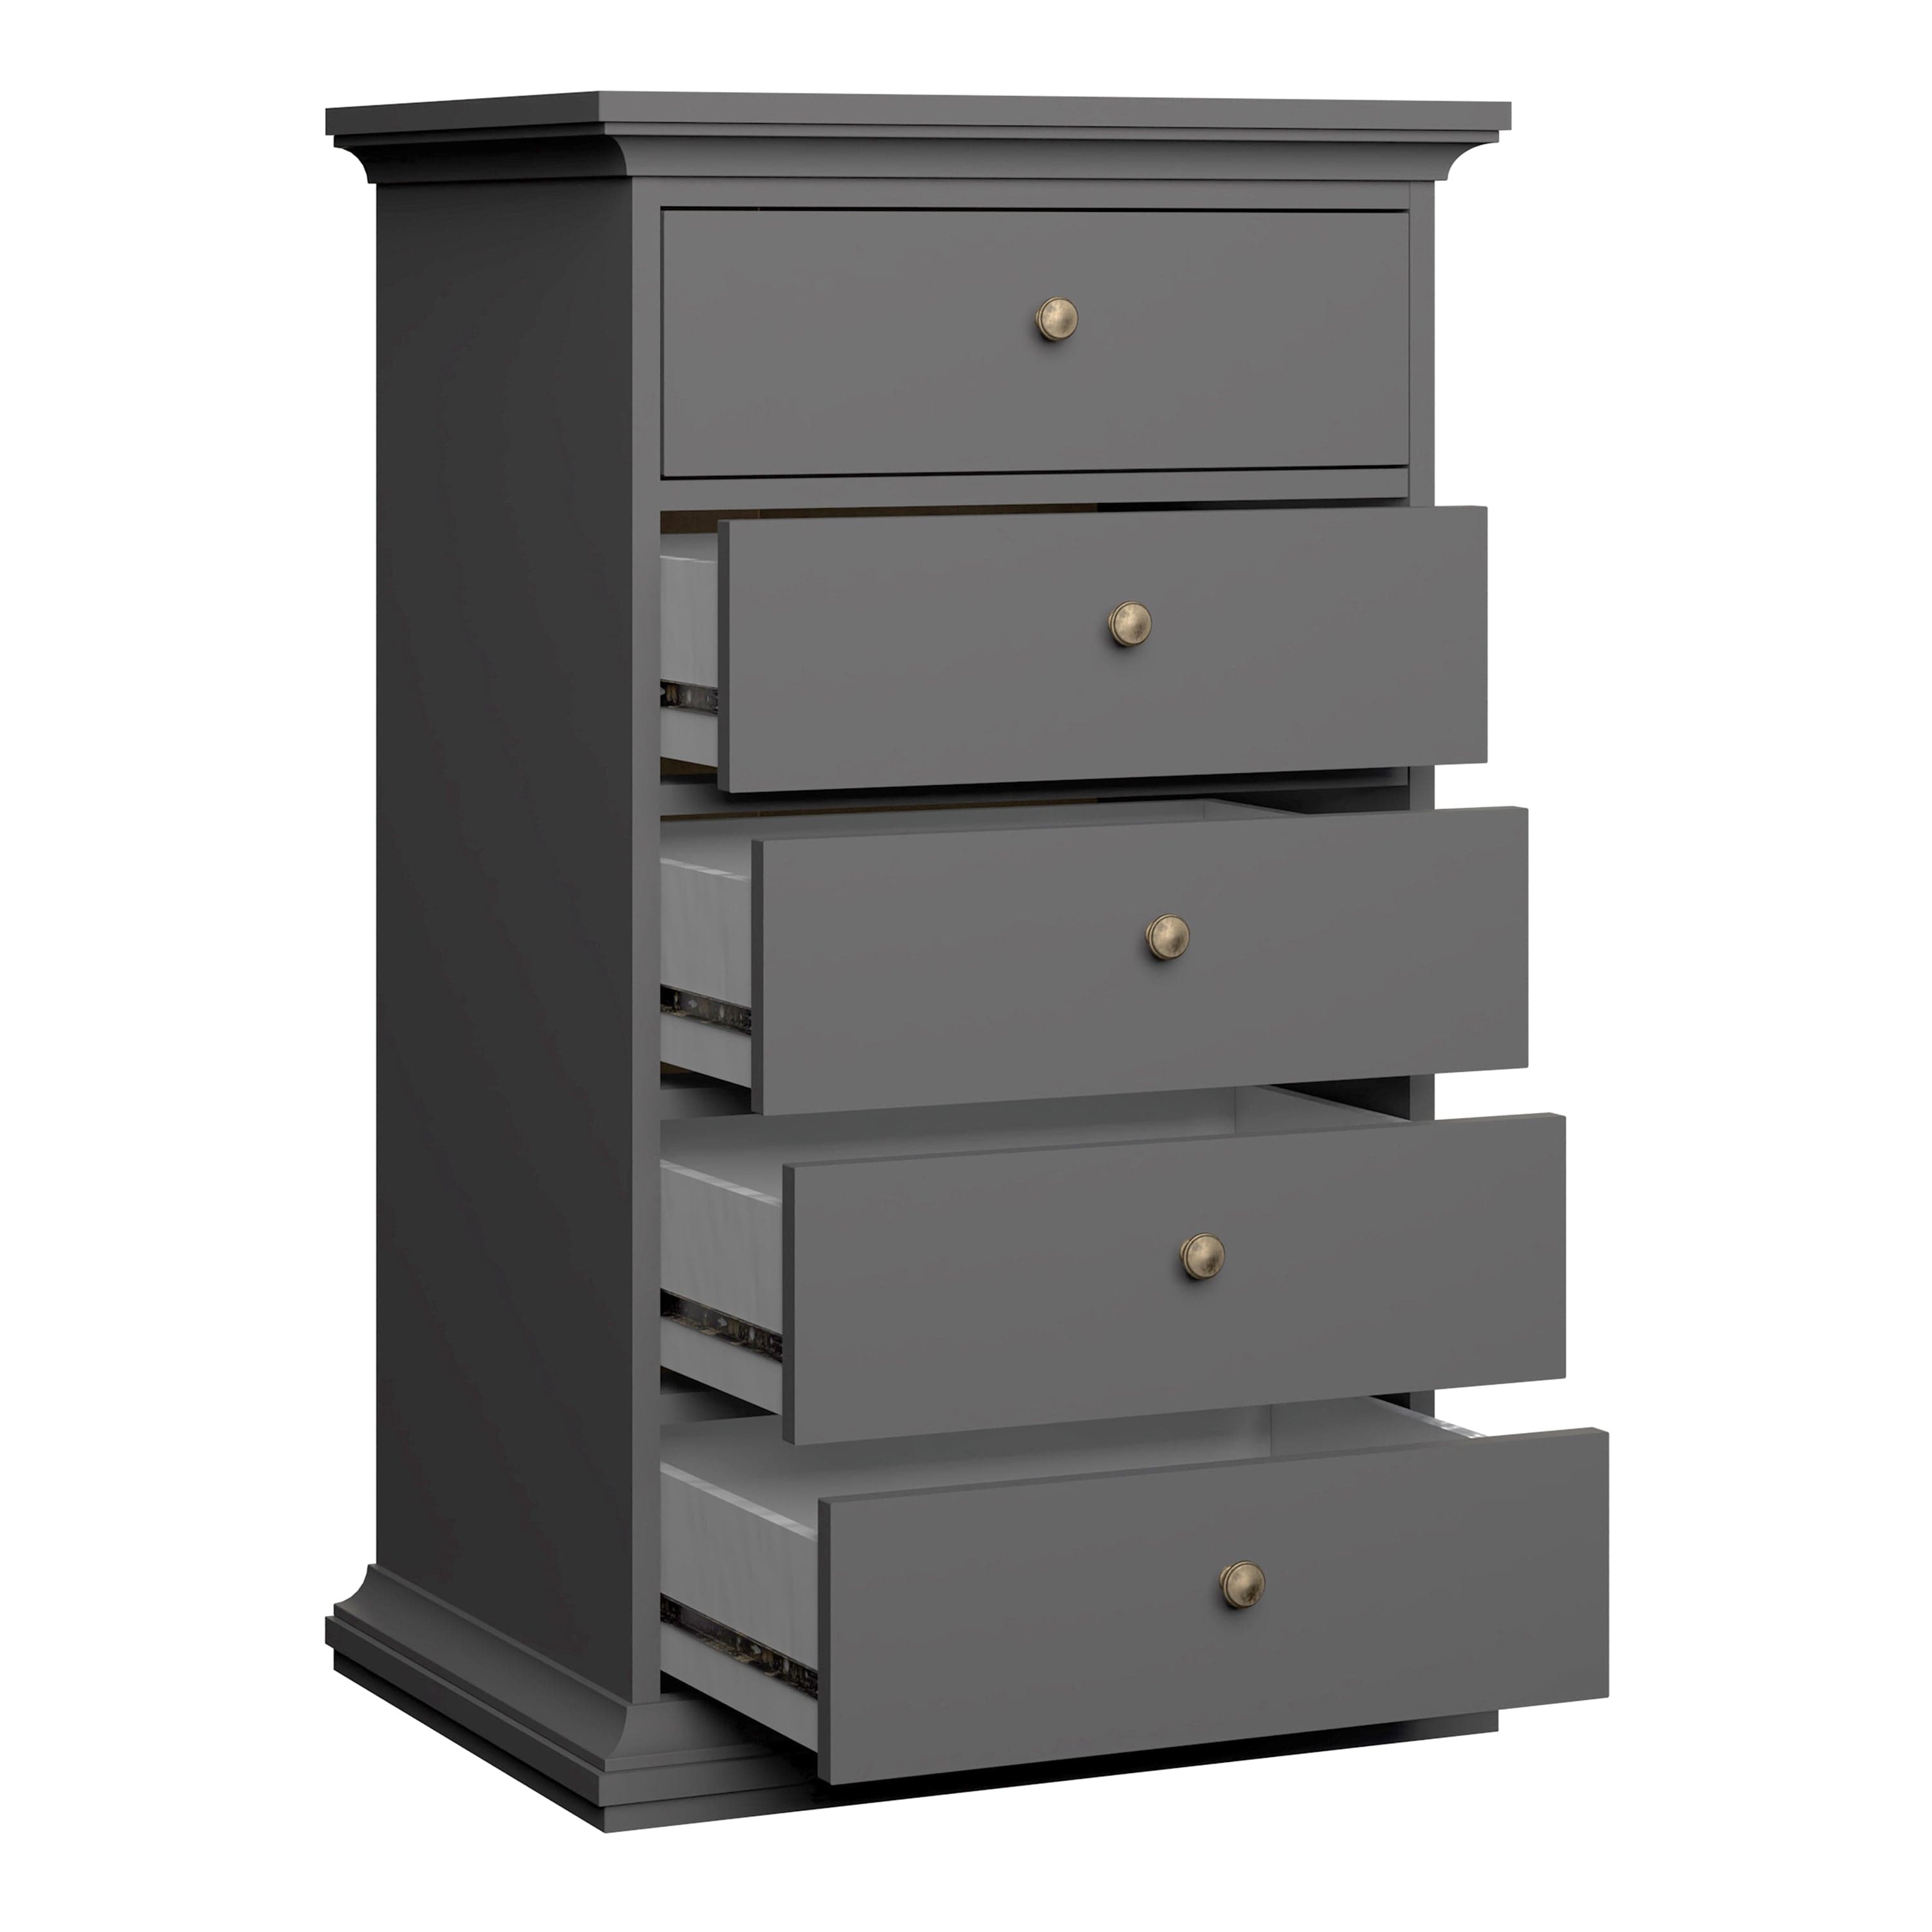 FTG Chest Of Drawers Paris Chest of 5 Drawers in Matt Grey Bed Kings